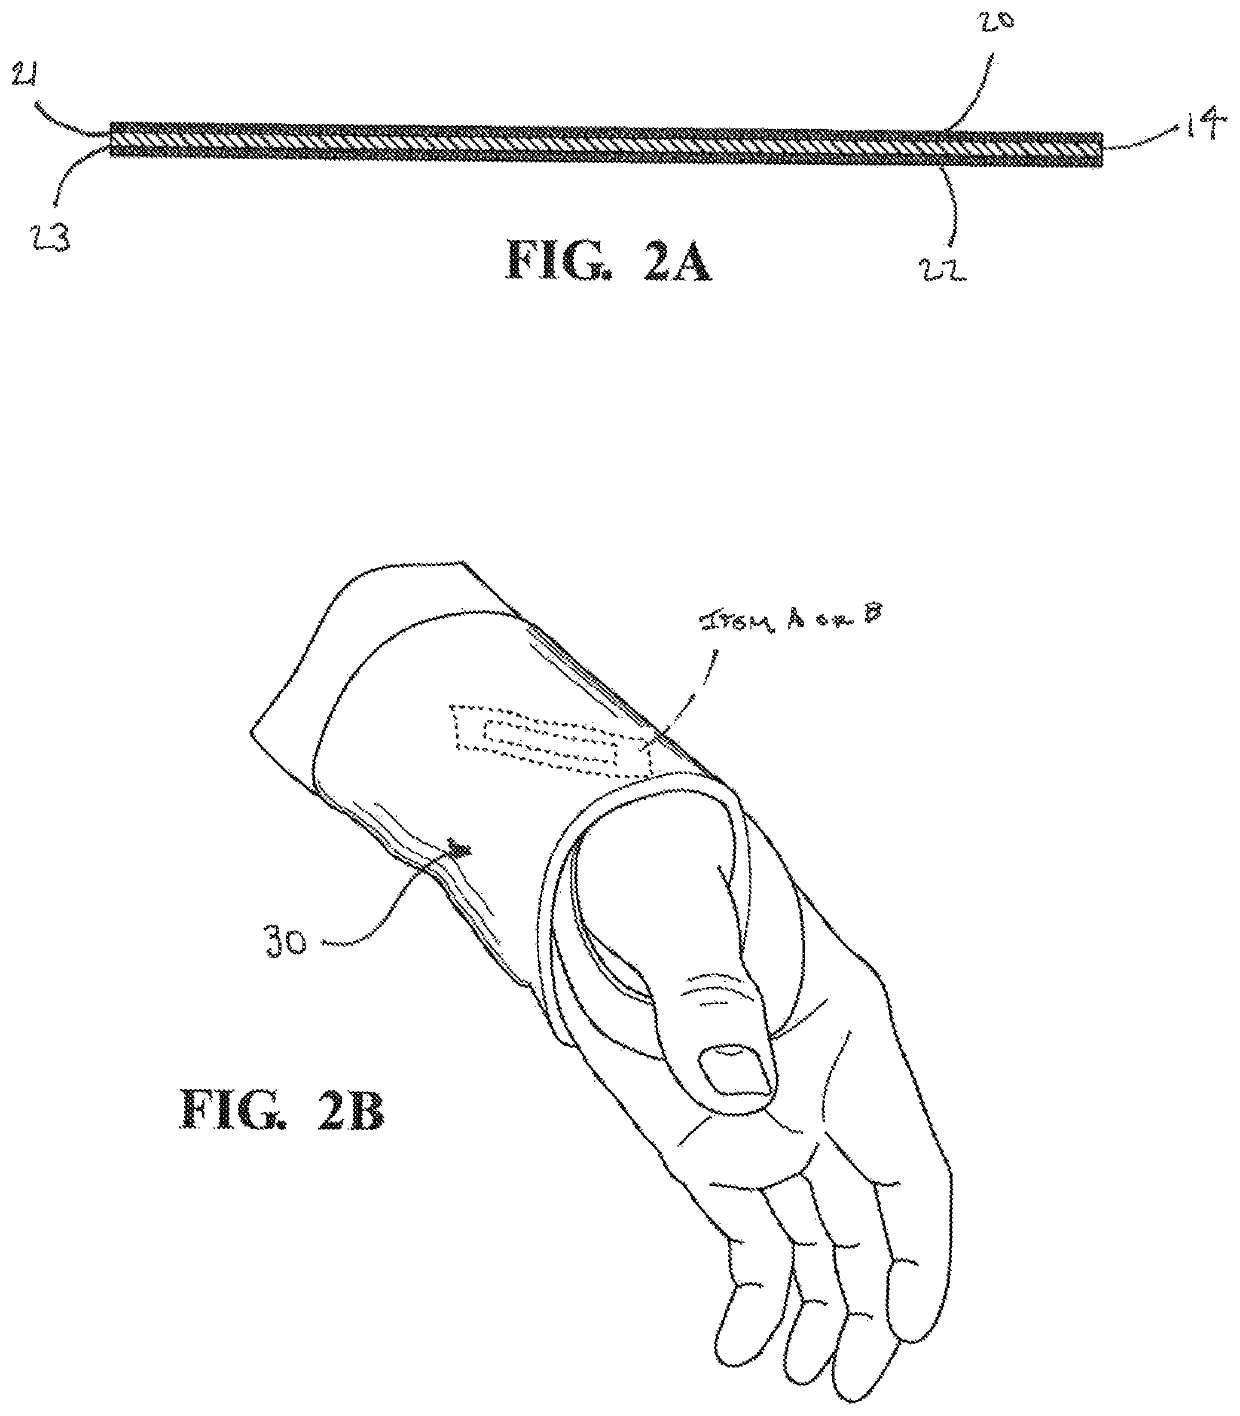 Pain relief utilizing a combination of polymer based materials